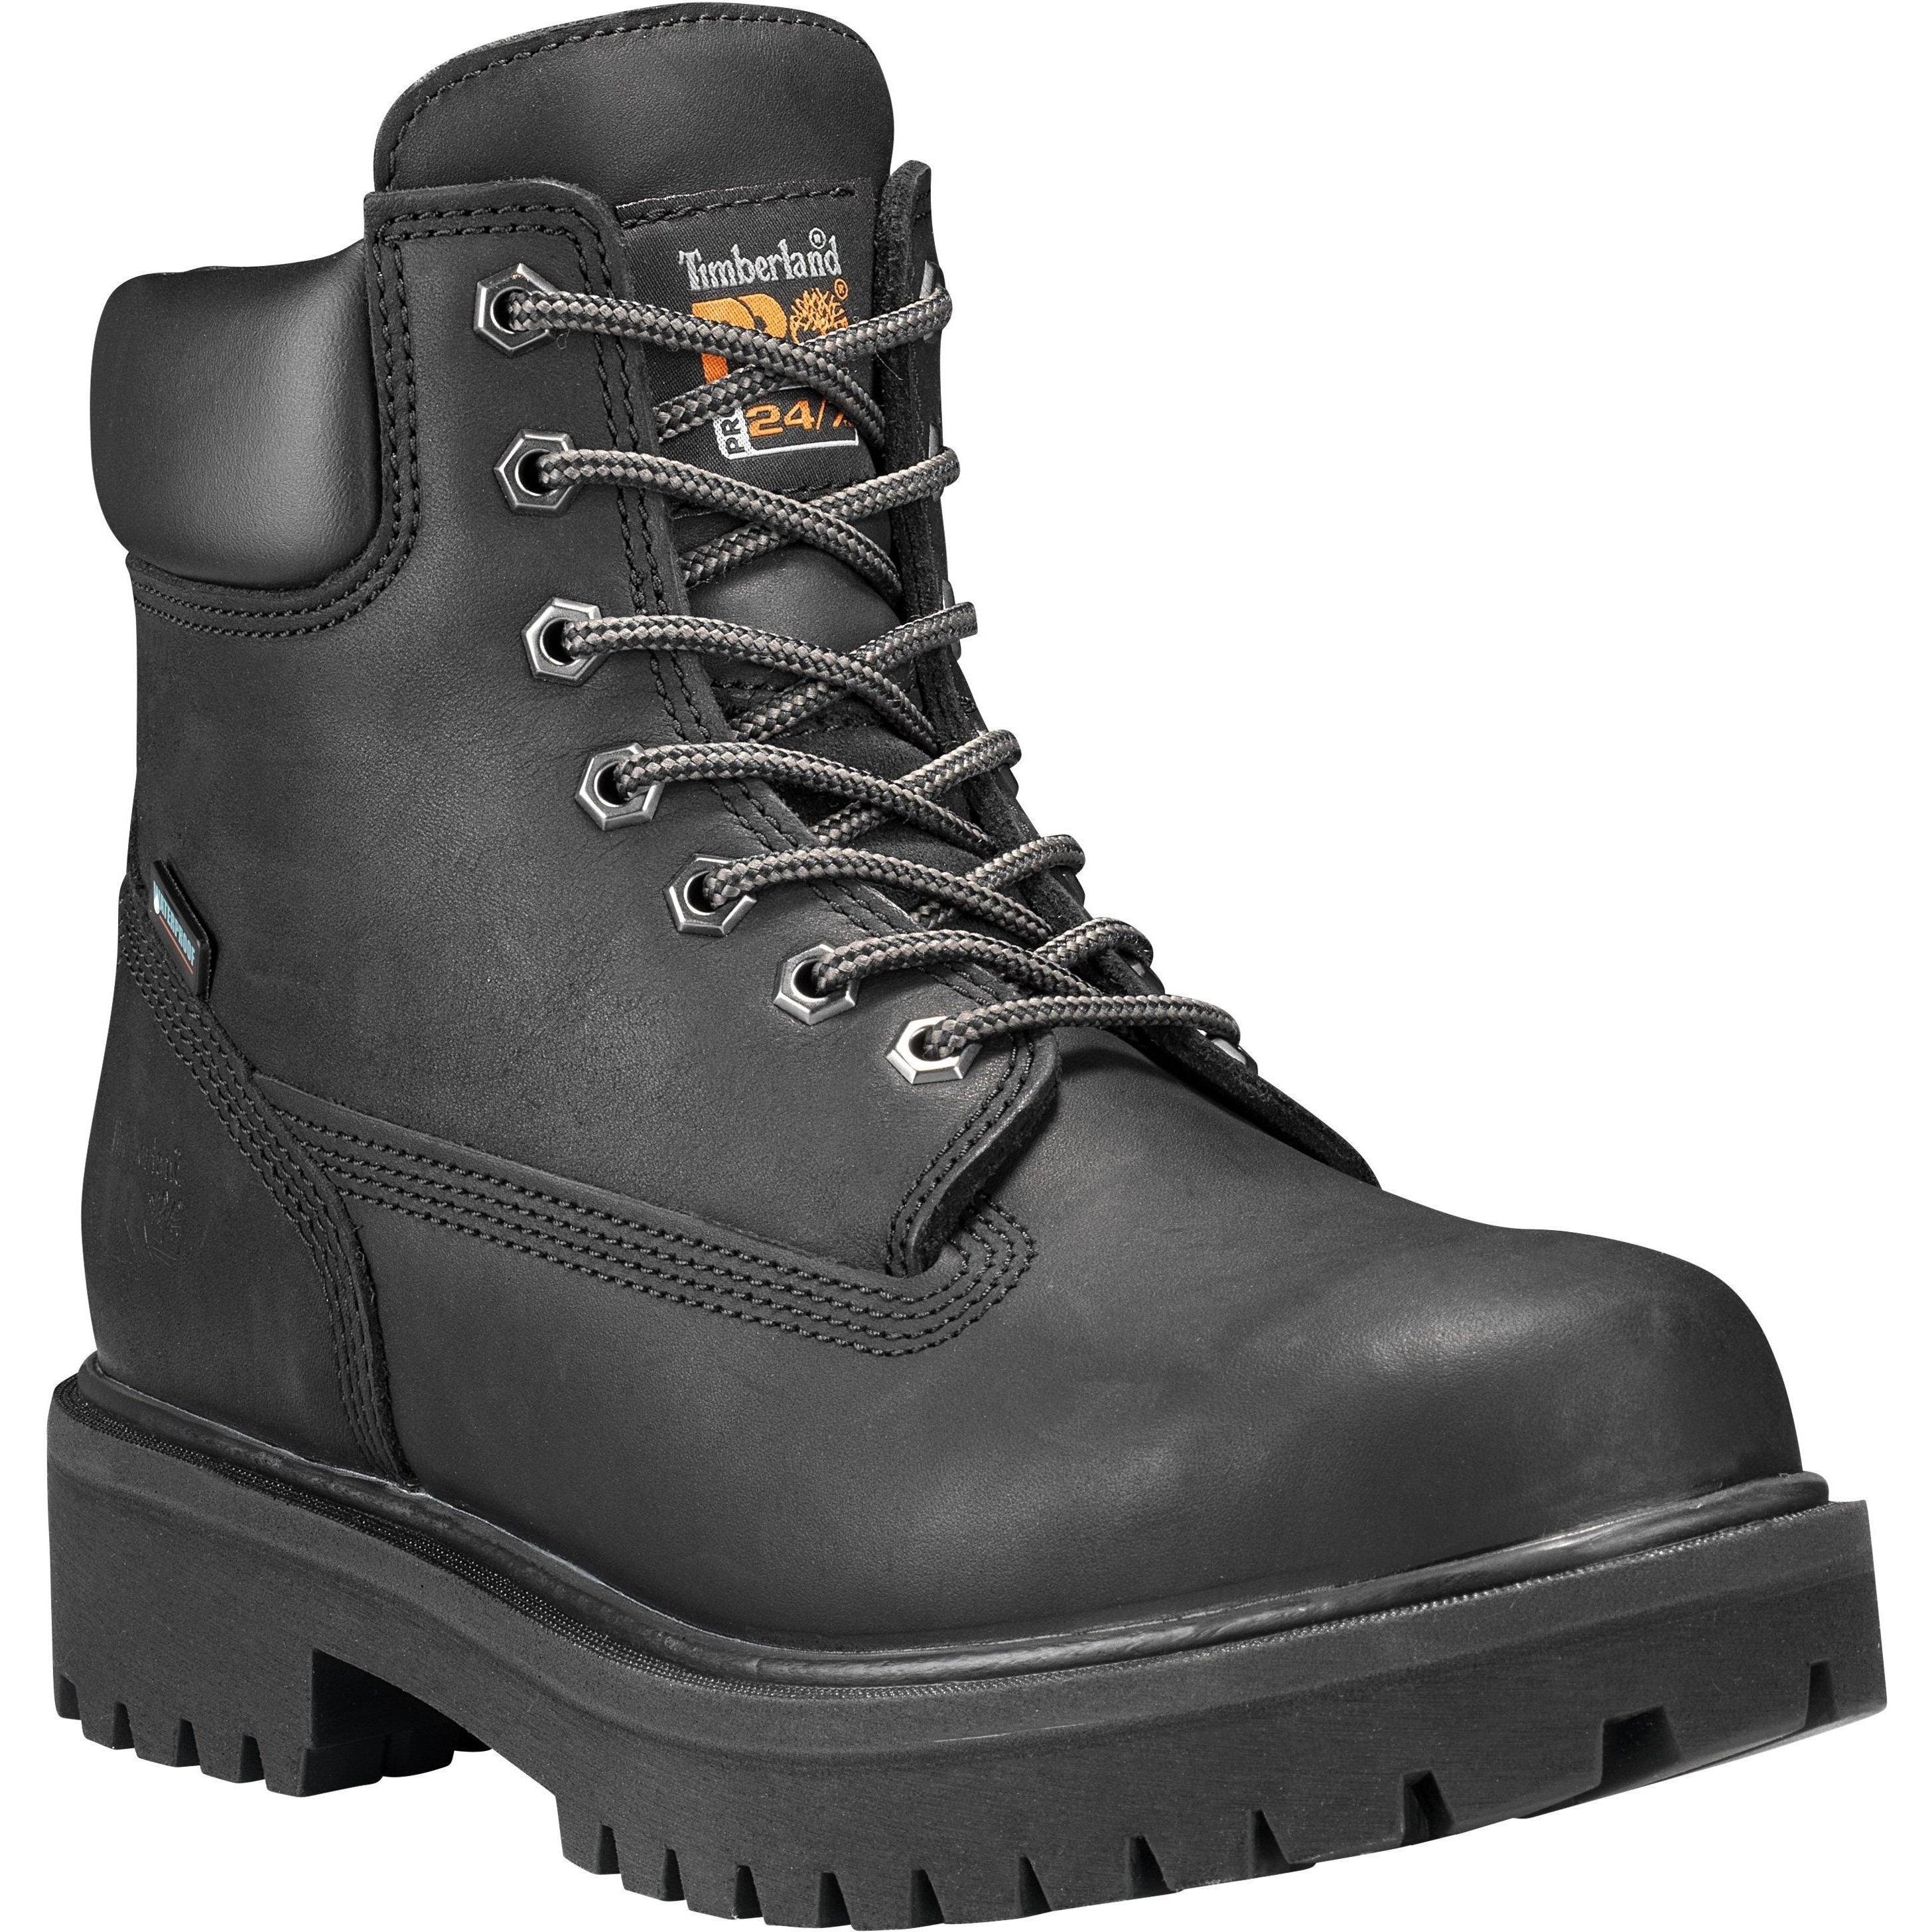 Timberland PRO Men's Direct Attach 6" Soft Toe Work Boot-TB026036001  - Overlook Boots